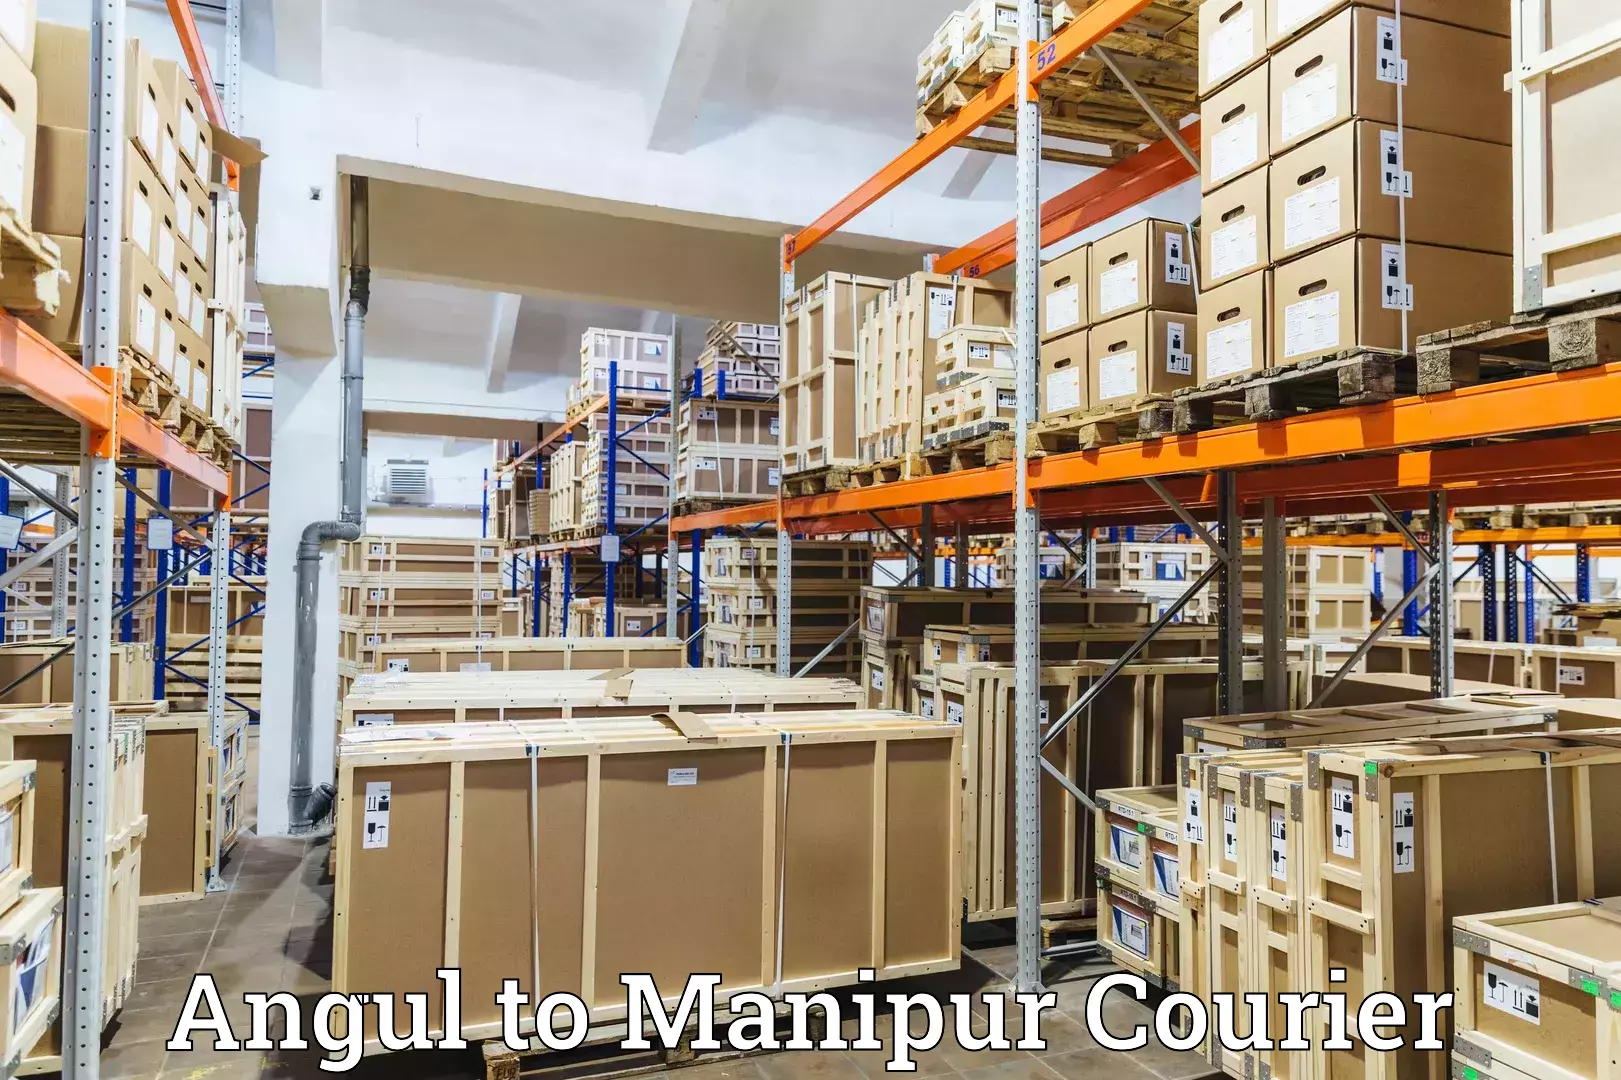 Global courier networks Angul to Chandel